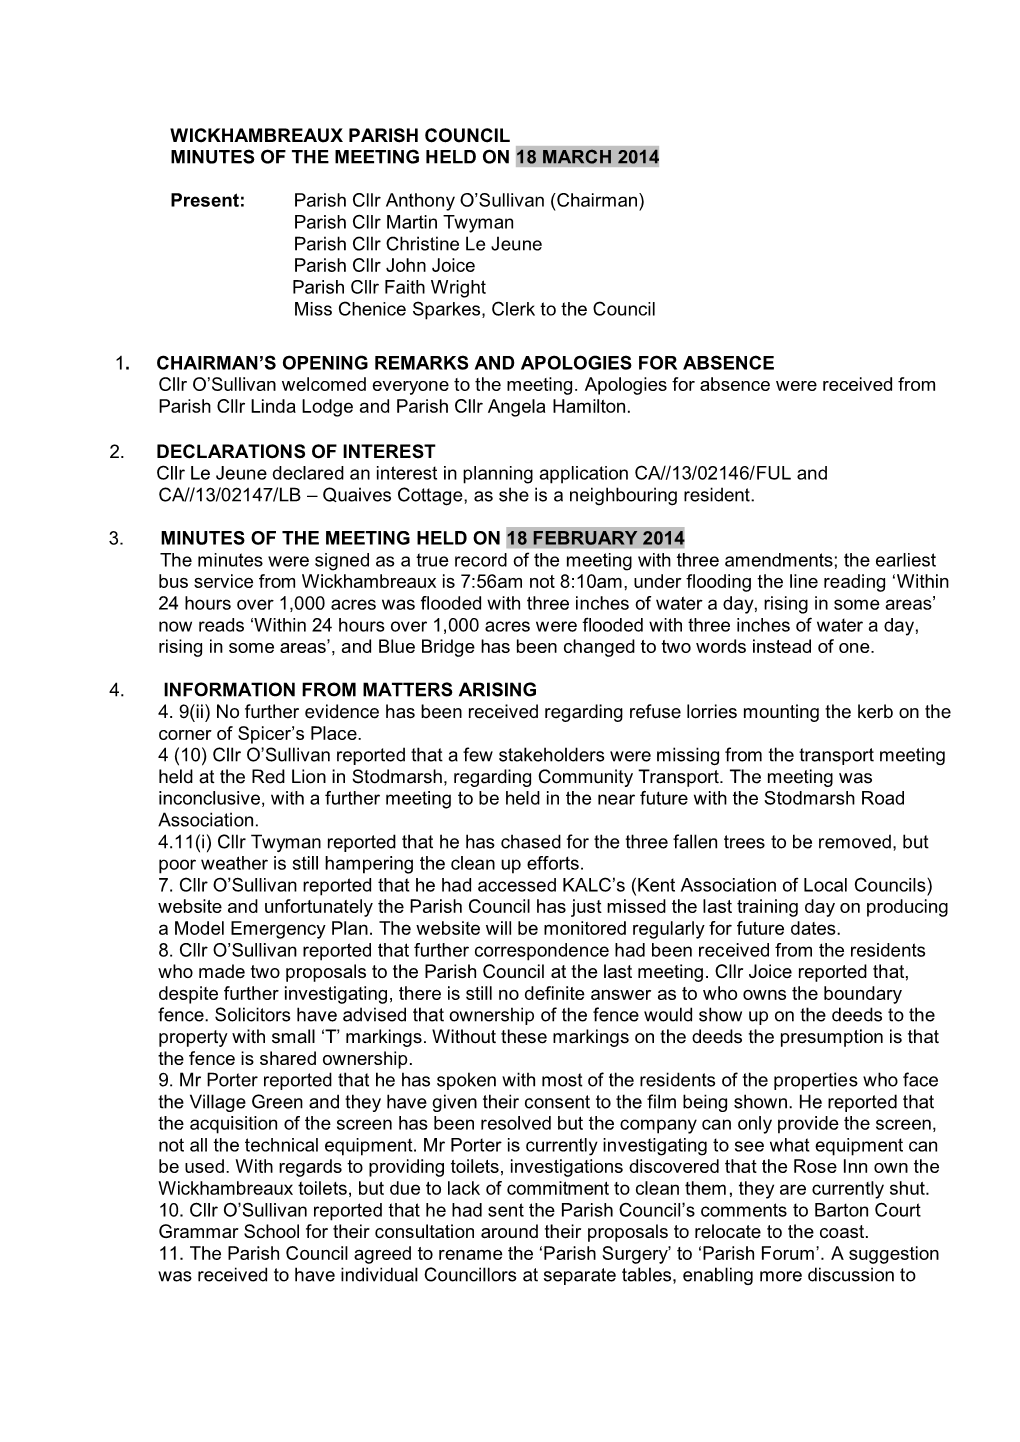 Wickhambreaux Parish Council Minutes of the Meeting Held on 18 March 2014